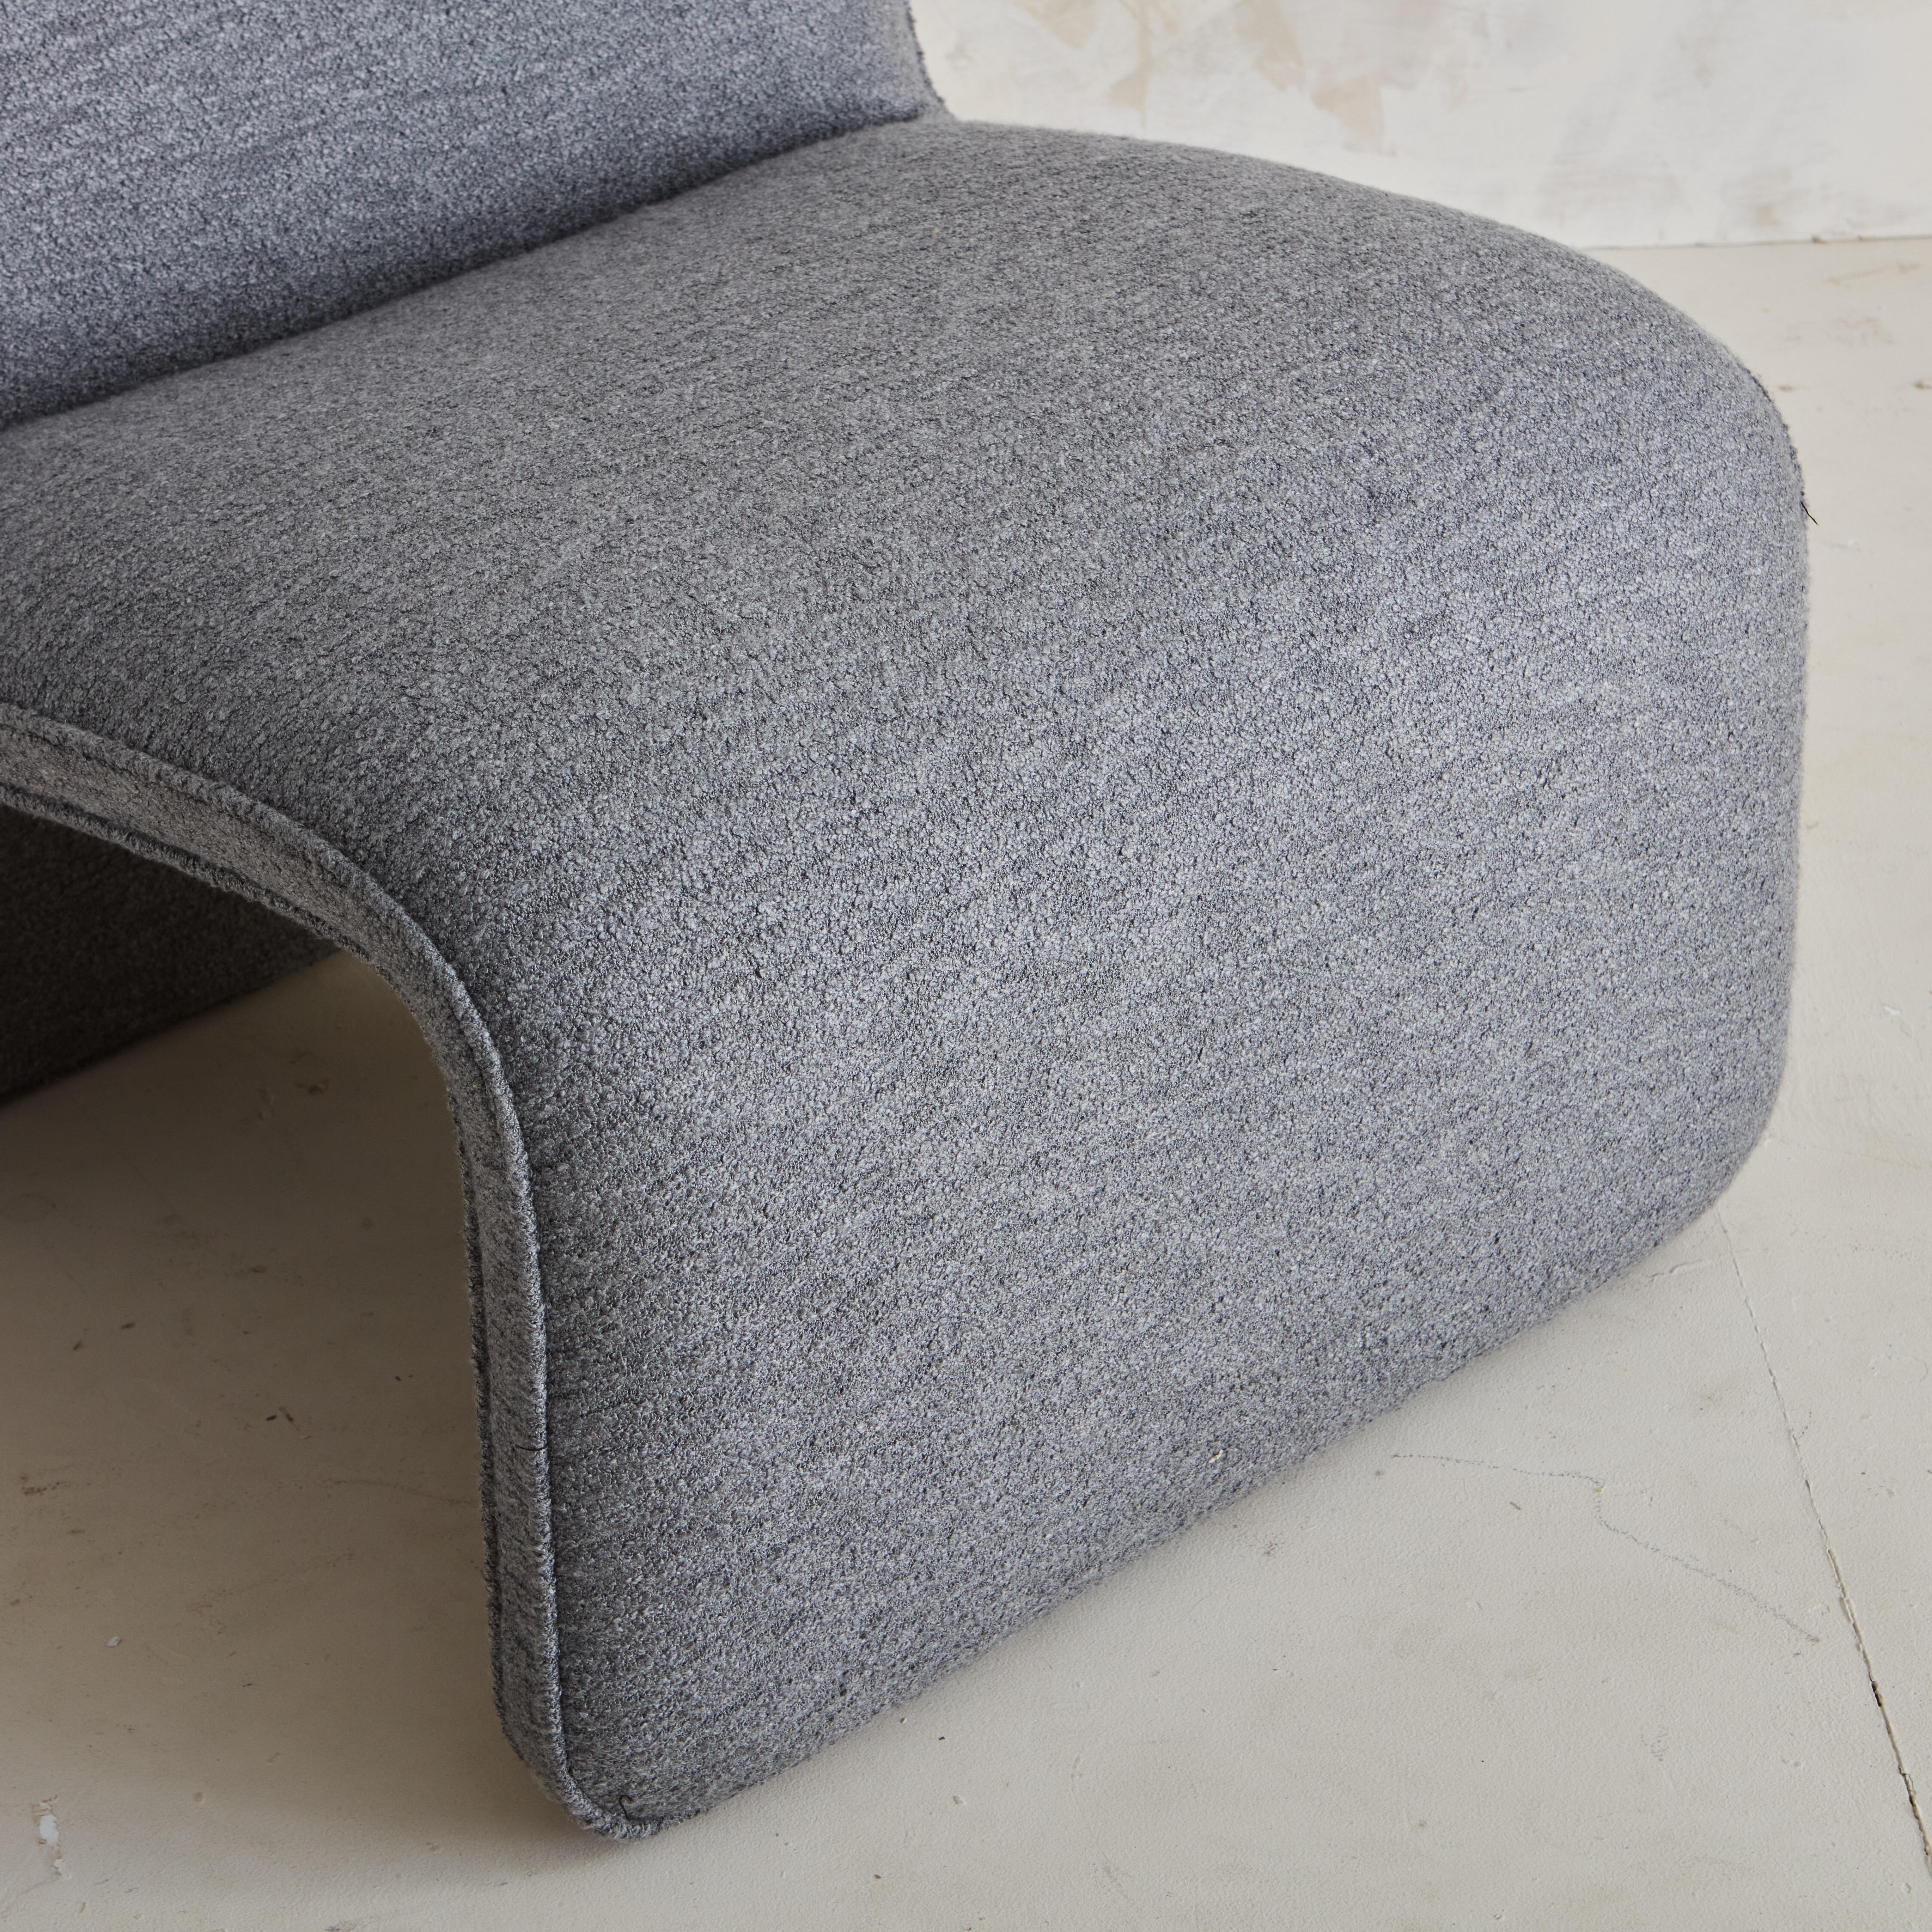 Sculptural Lounge Chair in Gray Wool Attributed to Vladimir Kagan for Preview  1